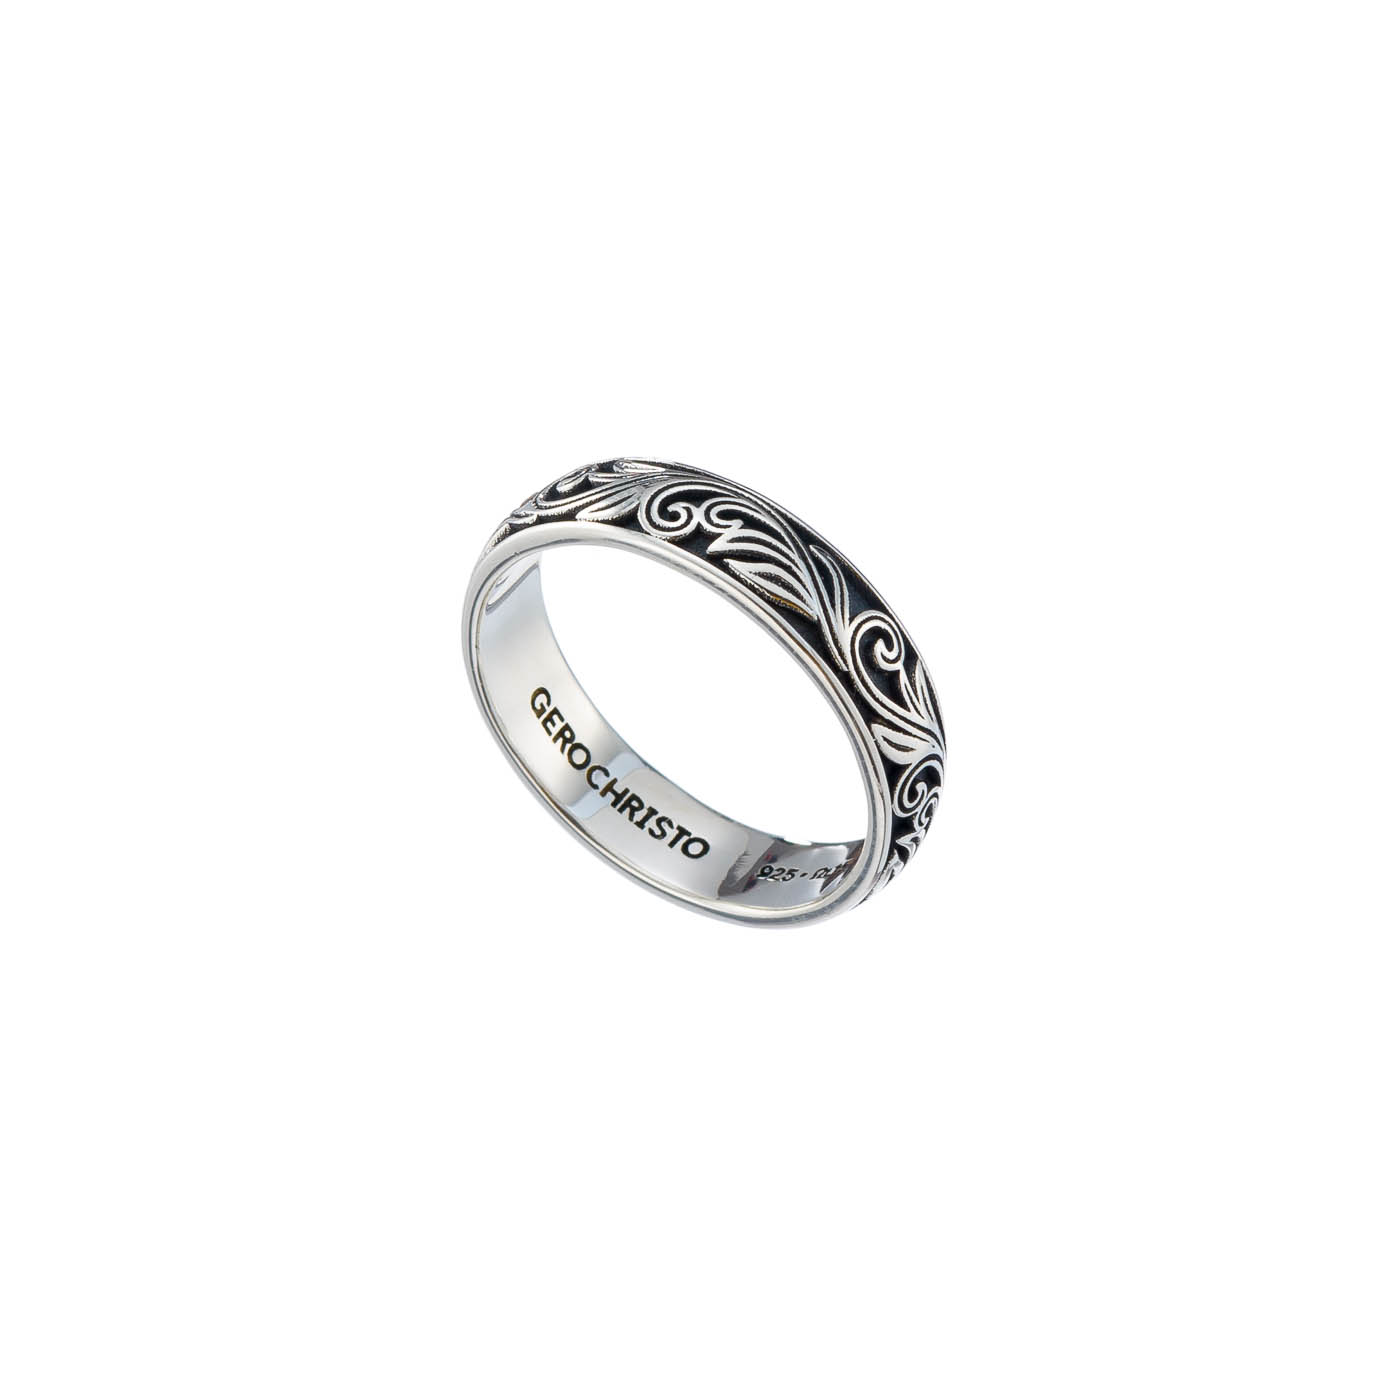 Floral Band ring in Sterling Silver